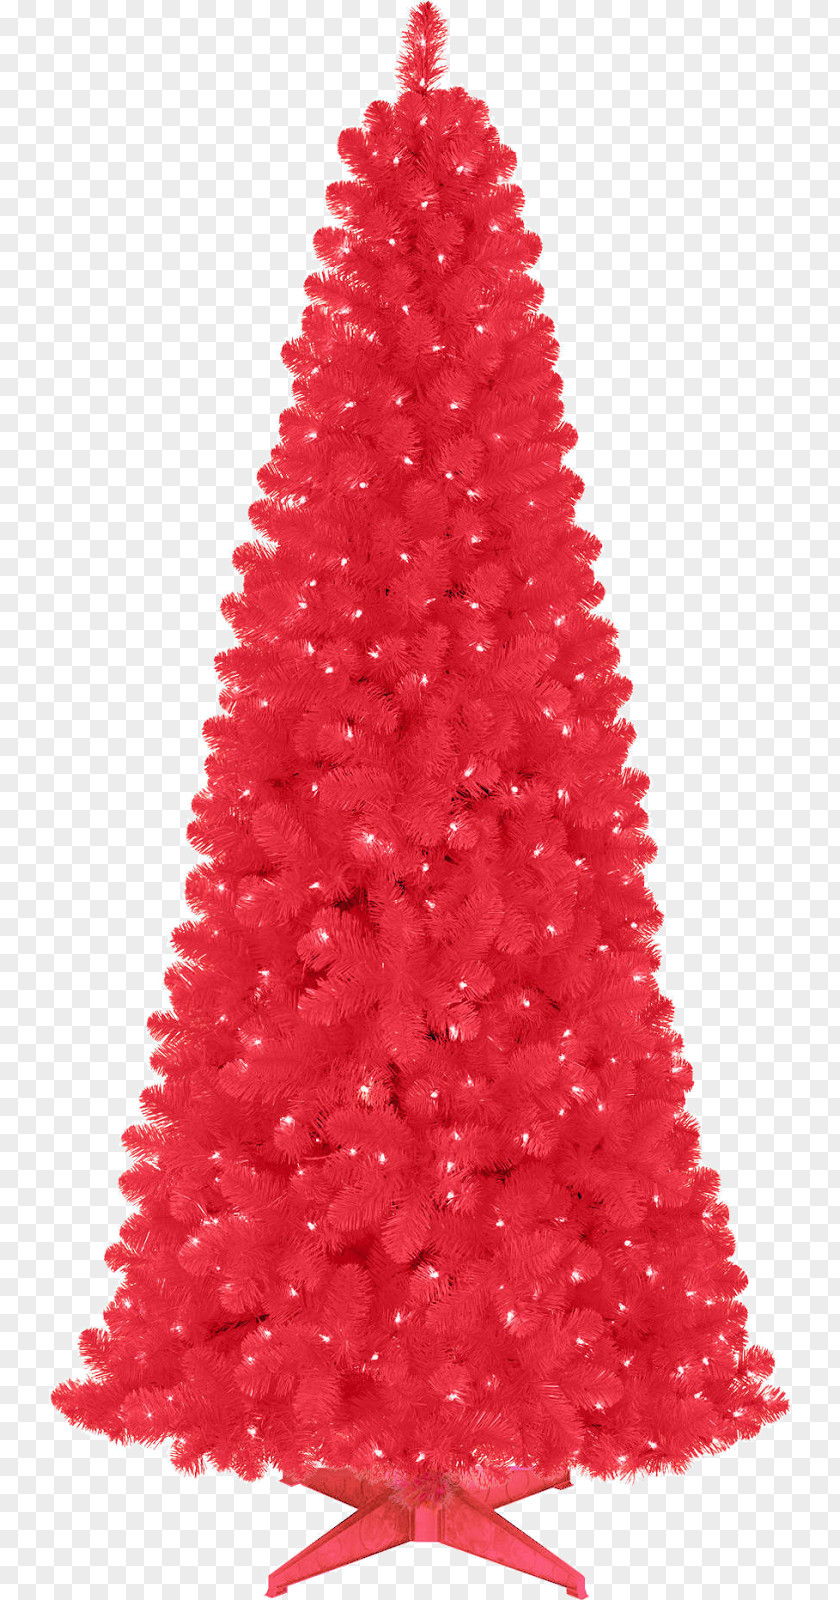 Christmas Artificial Tree Ornament Lights PNG